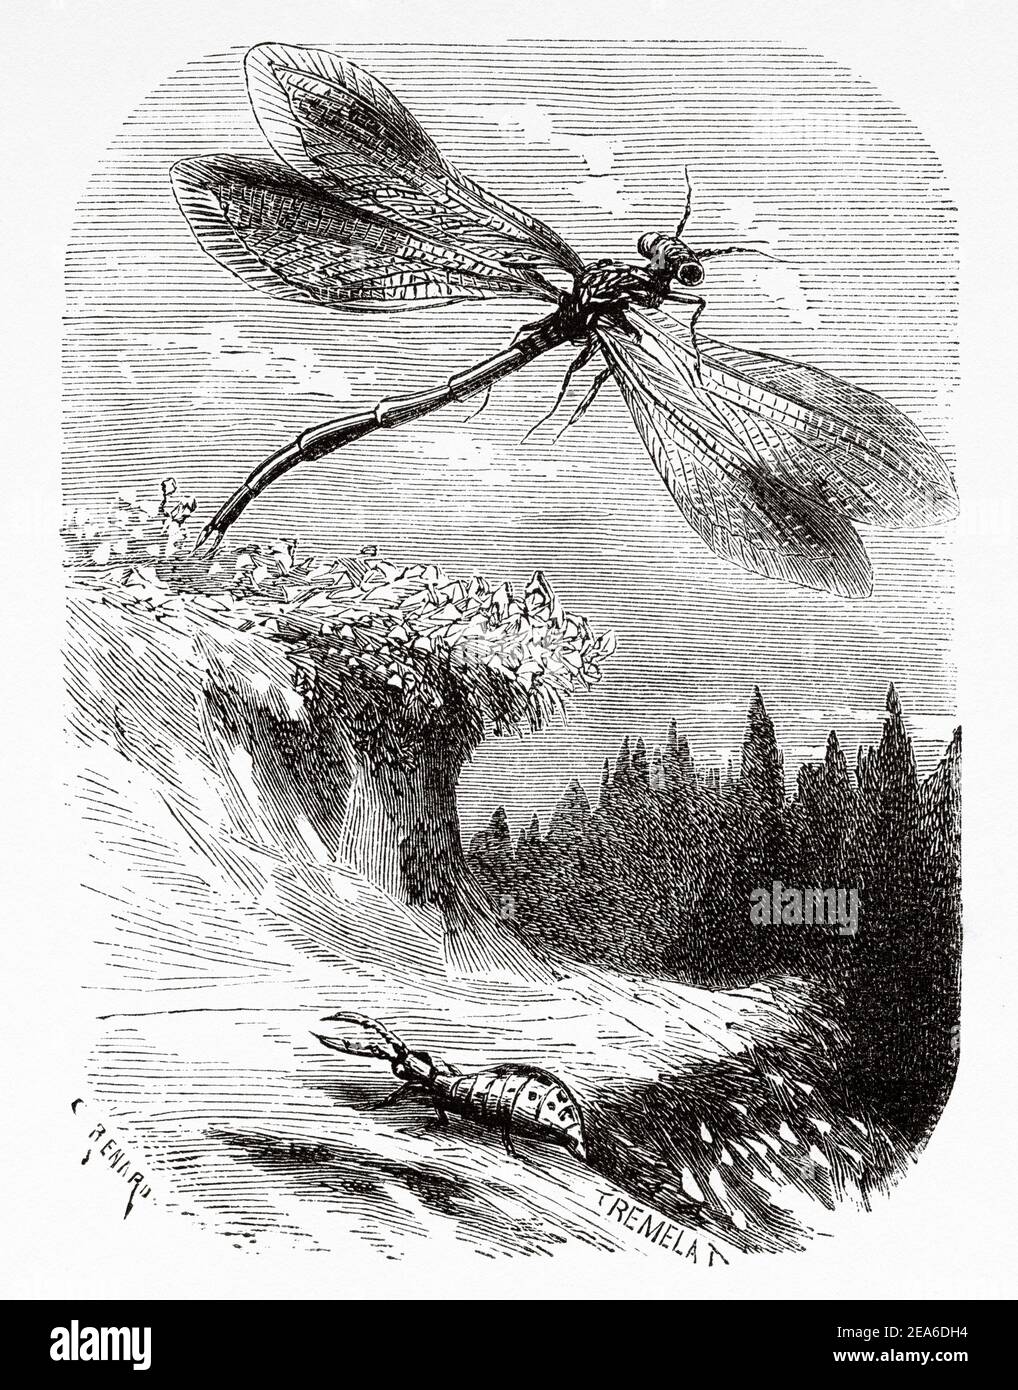 Old illustration from the nineteenth century of Adventures of a cricket by Ernest Charles Auguste Candèze (1827-1898) Belgian doctor and entomologist. Old 19th century engraved illustration from El Mundo Ilustrado 1879 Stock Photo